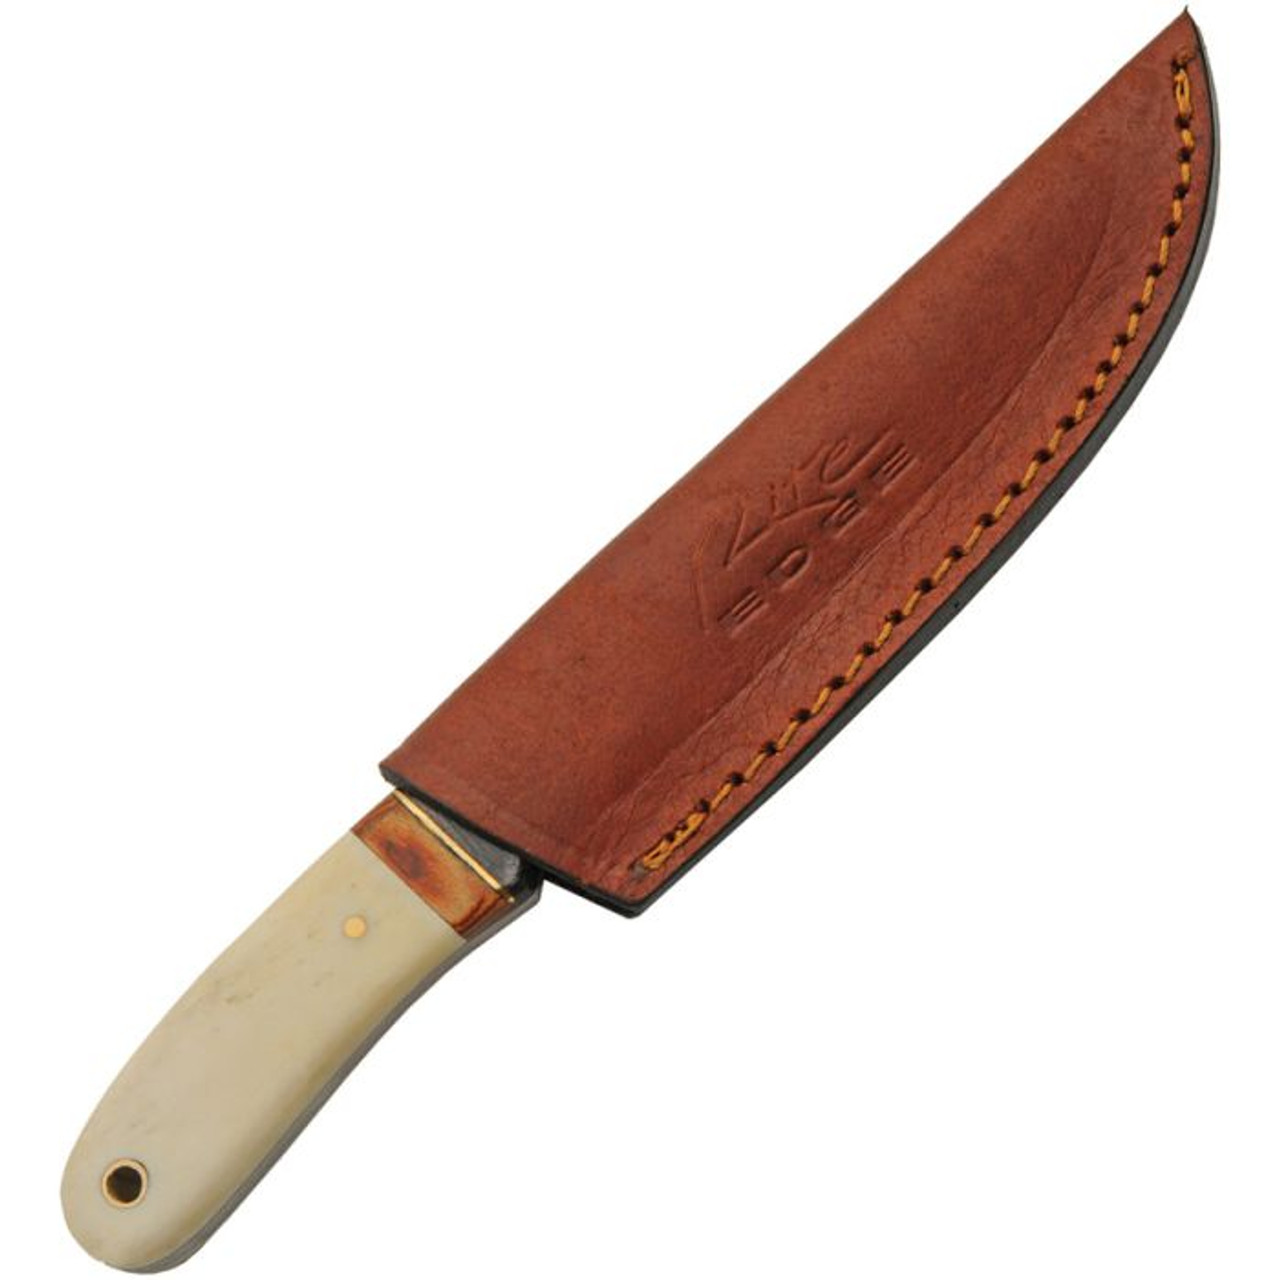 Damascus Knives Autumn Hunter (DM1340) 3" Damascus Drop Point Plain Blade, Smooth Bone Handle with Brass Bolsters and Dark and Light Brown Wood Handle Spacers, Brown Leather Belt Sheath